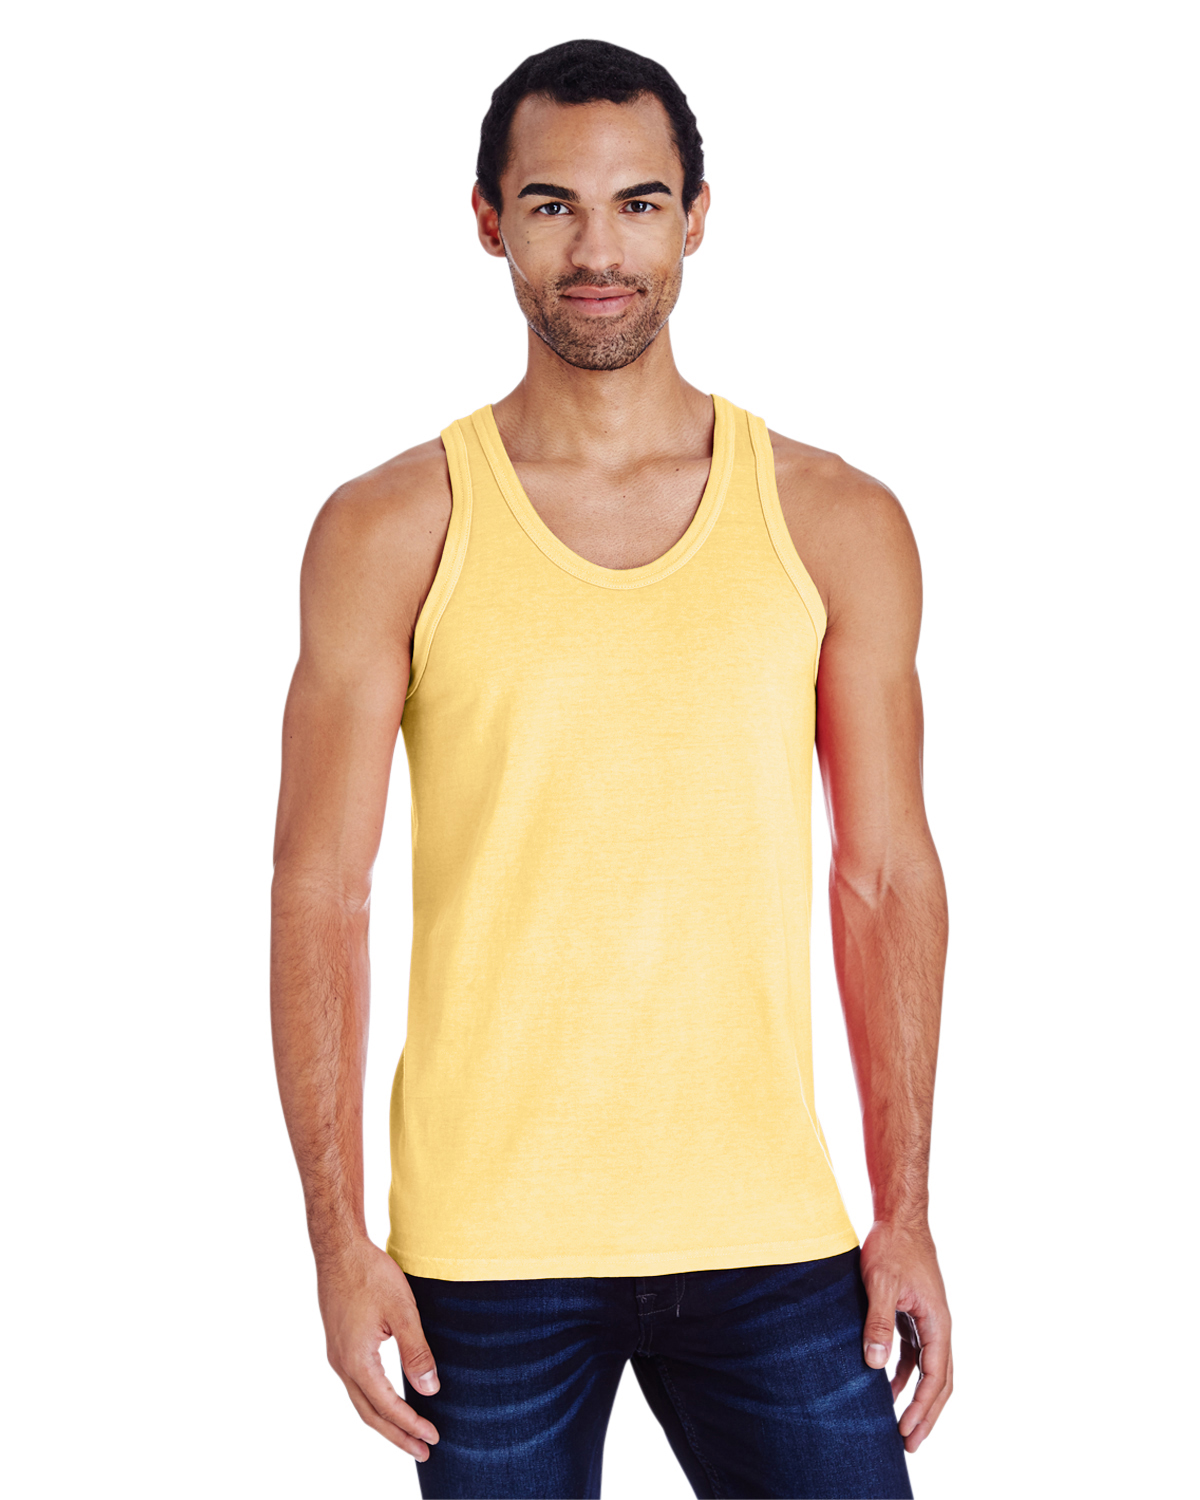 Comfort Wash GDH300 Garment Dyed Unisex Tank Top - From $7.29